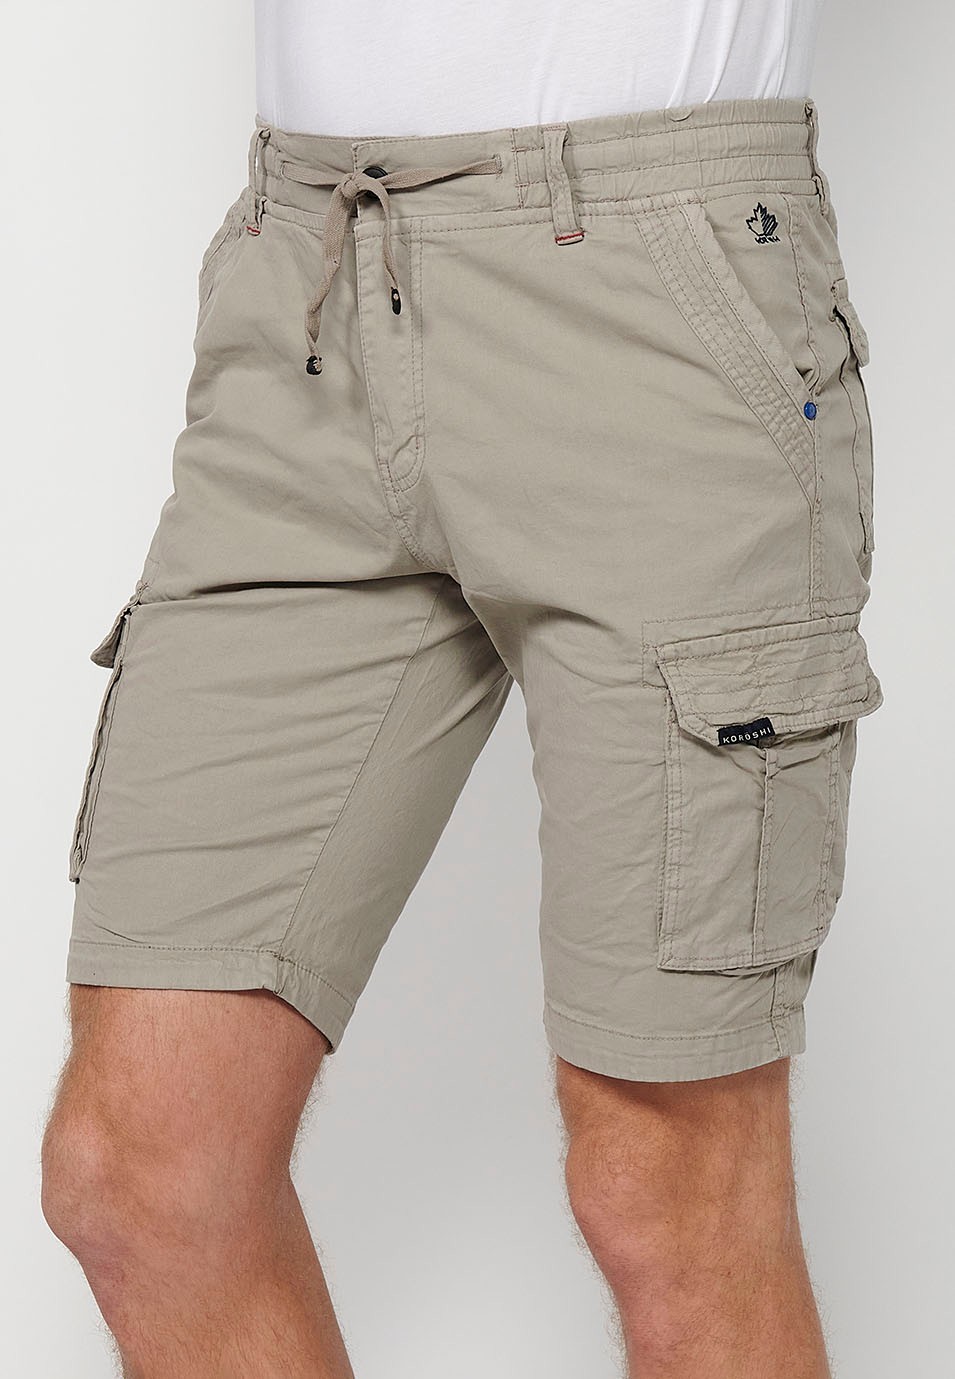 Cargo shorts with front closure with zipper and button and four pockets, two back pockets with flap with two cargo pockets with flap and adjustable waist with drawstring in Stone Color for Men